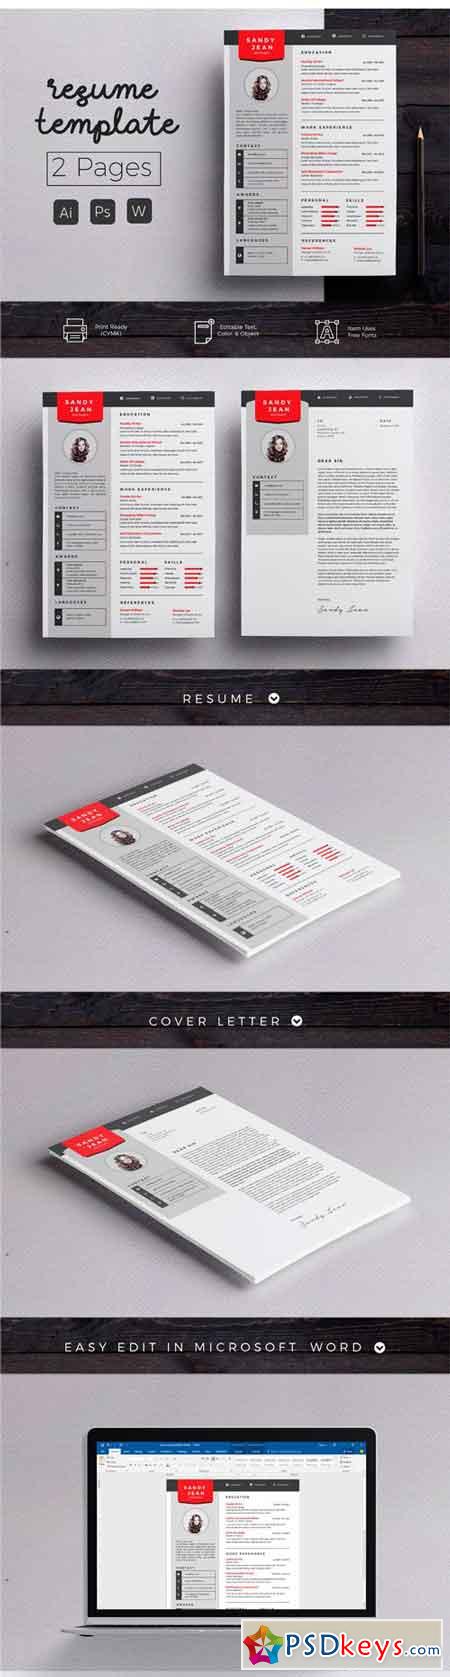 Clean Resume & Cover Letter 1659509